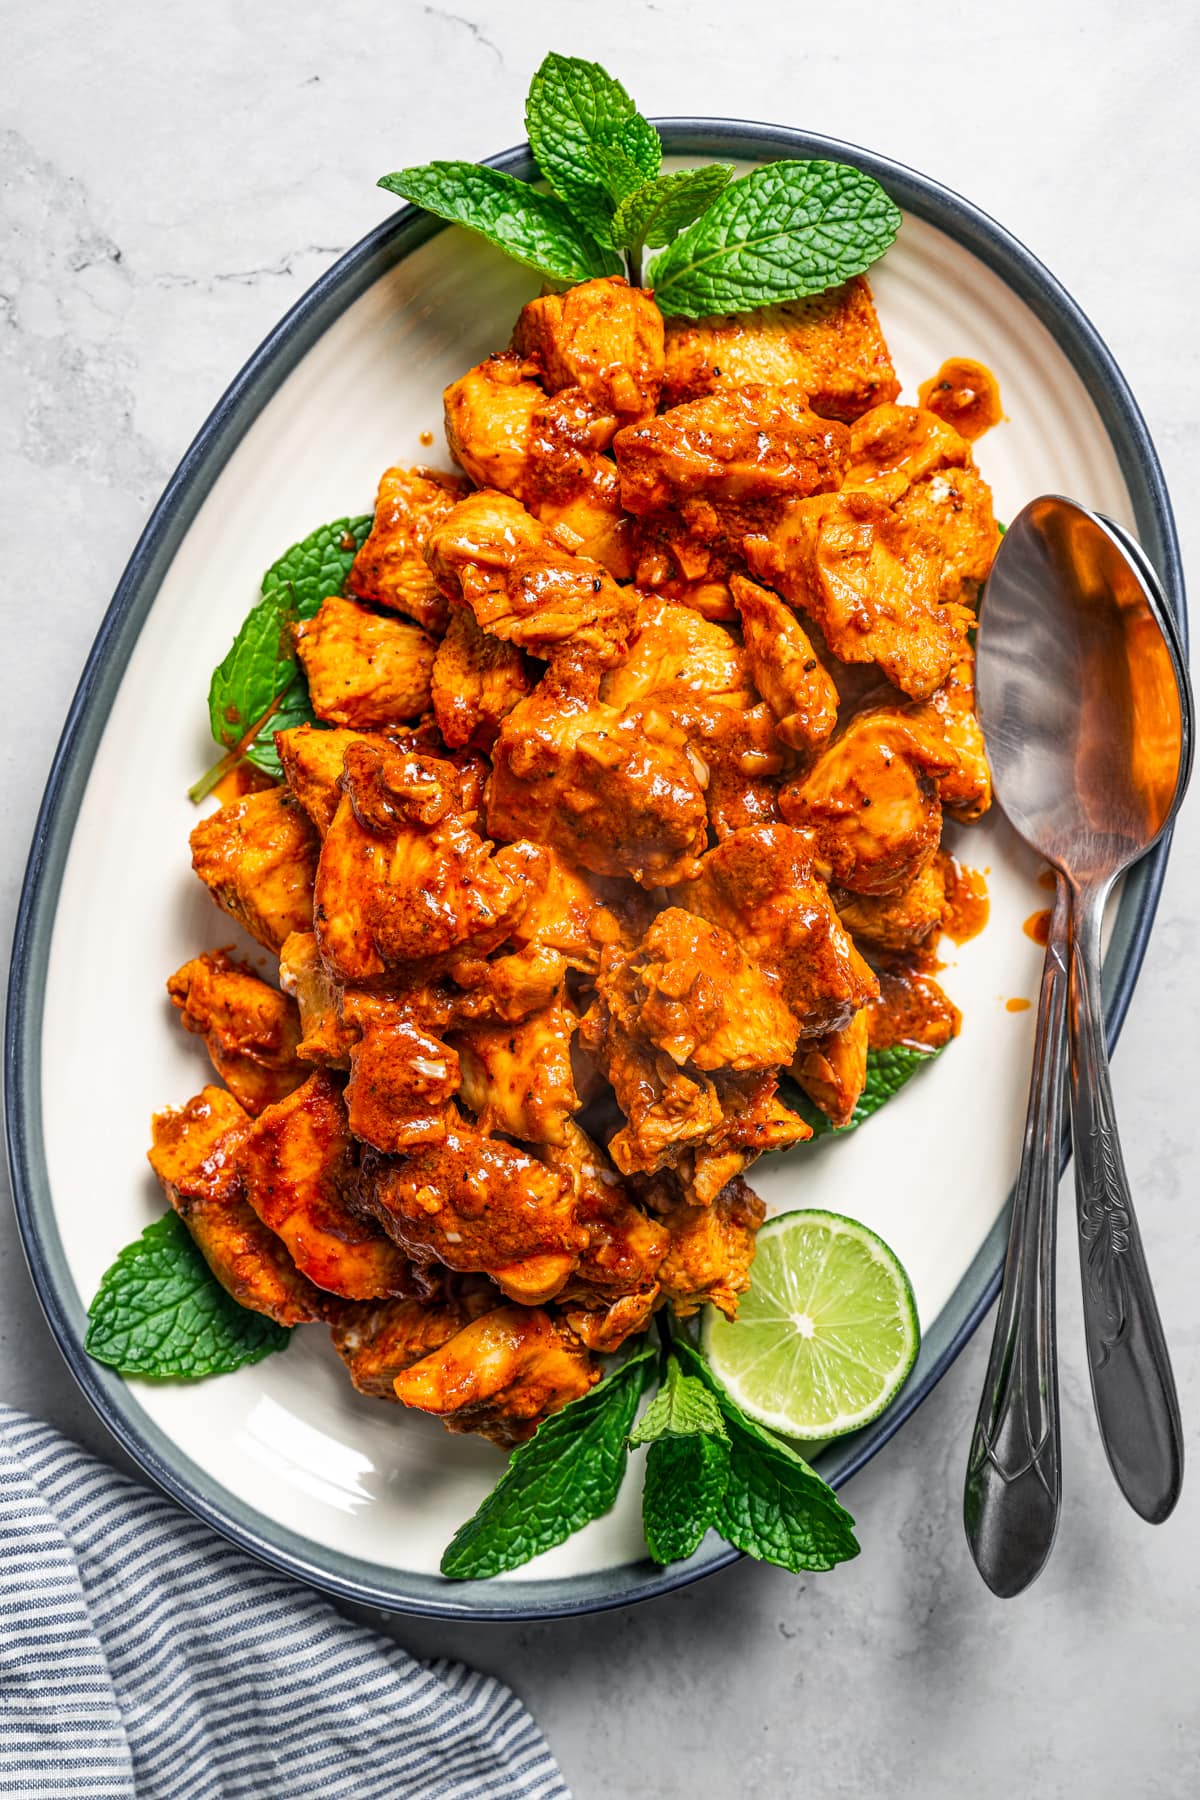 Chicken bites tossed with harissa paste mixture and served on an oval platter, garnished with lime and green herbs.